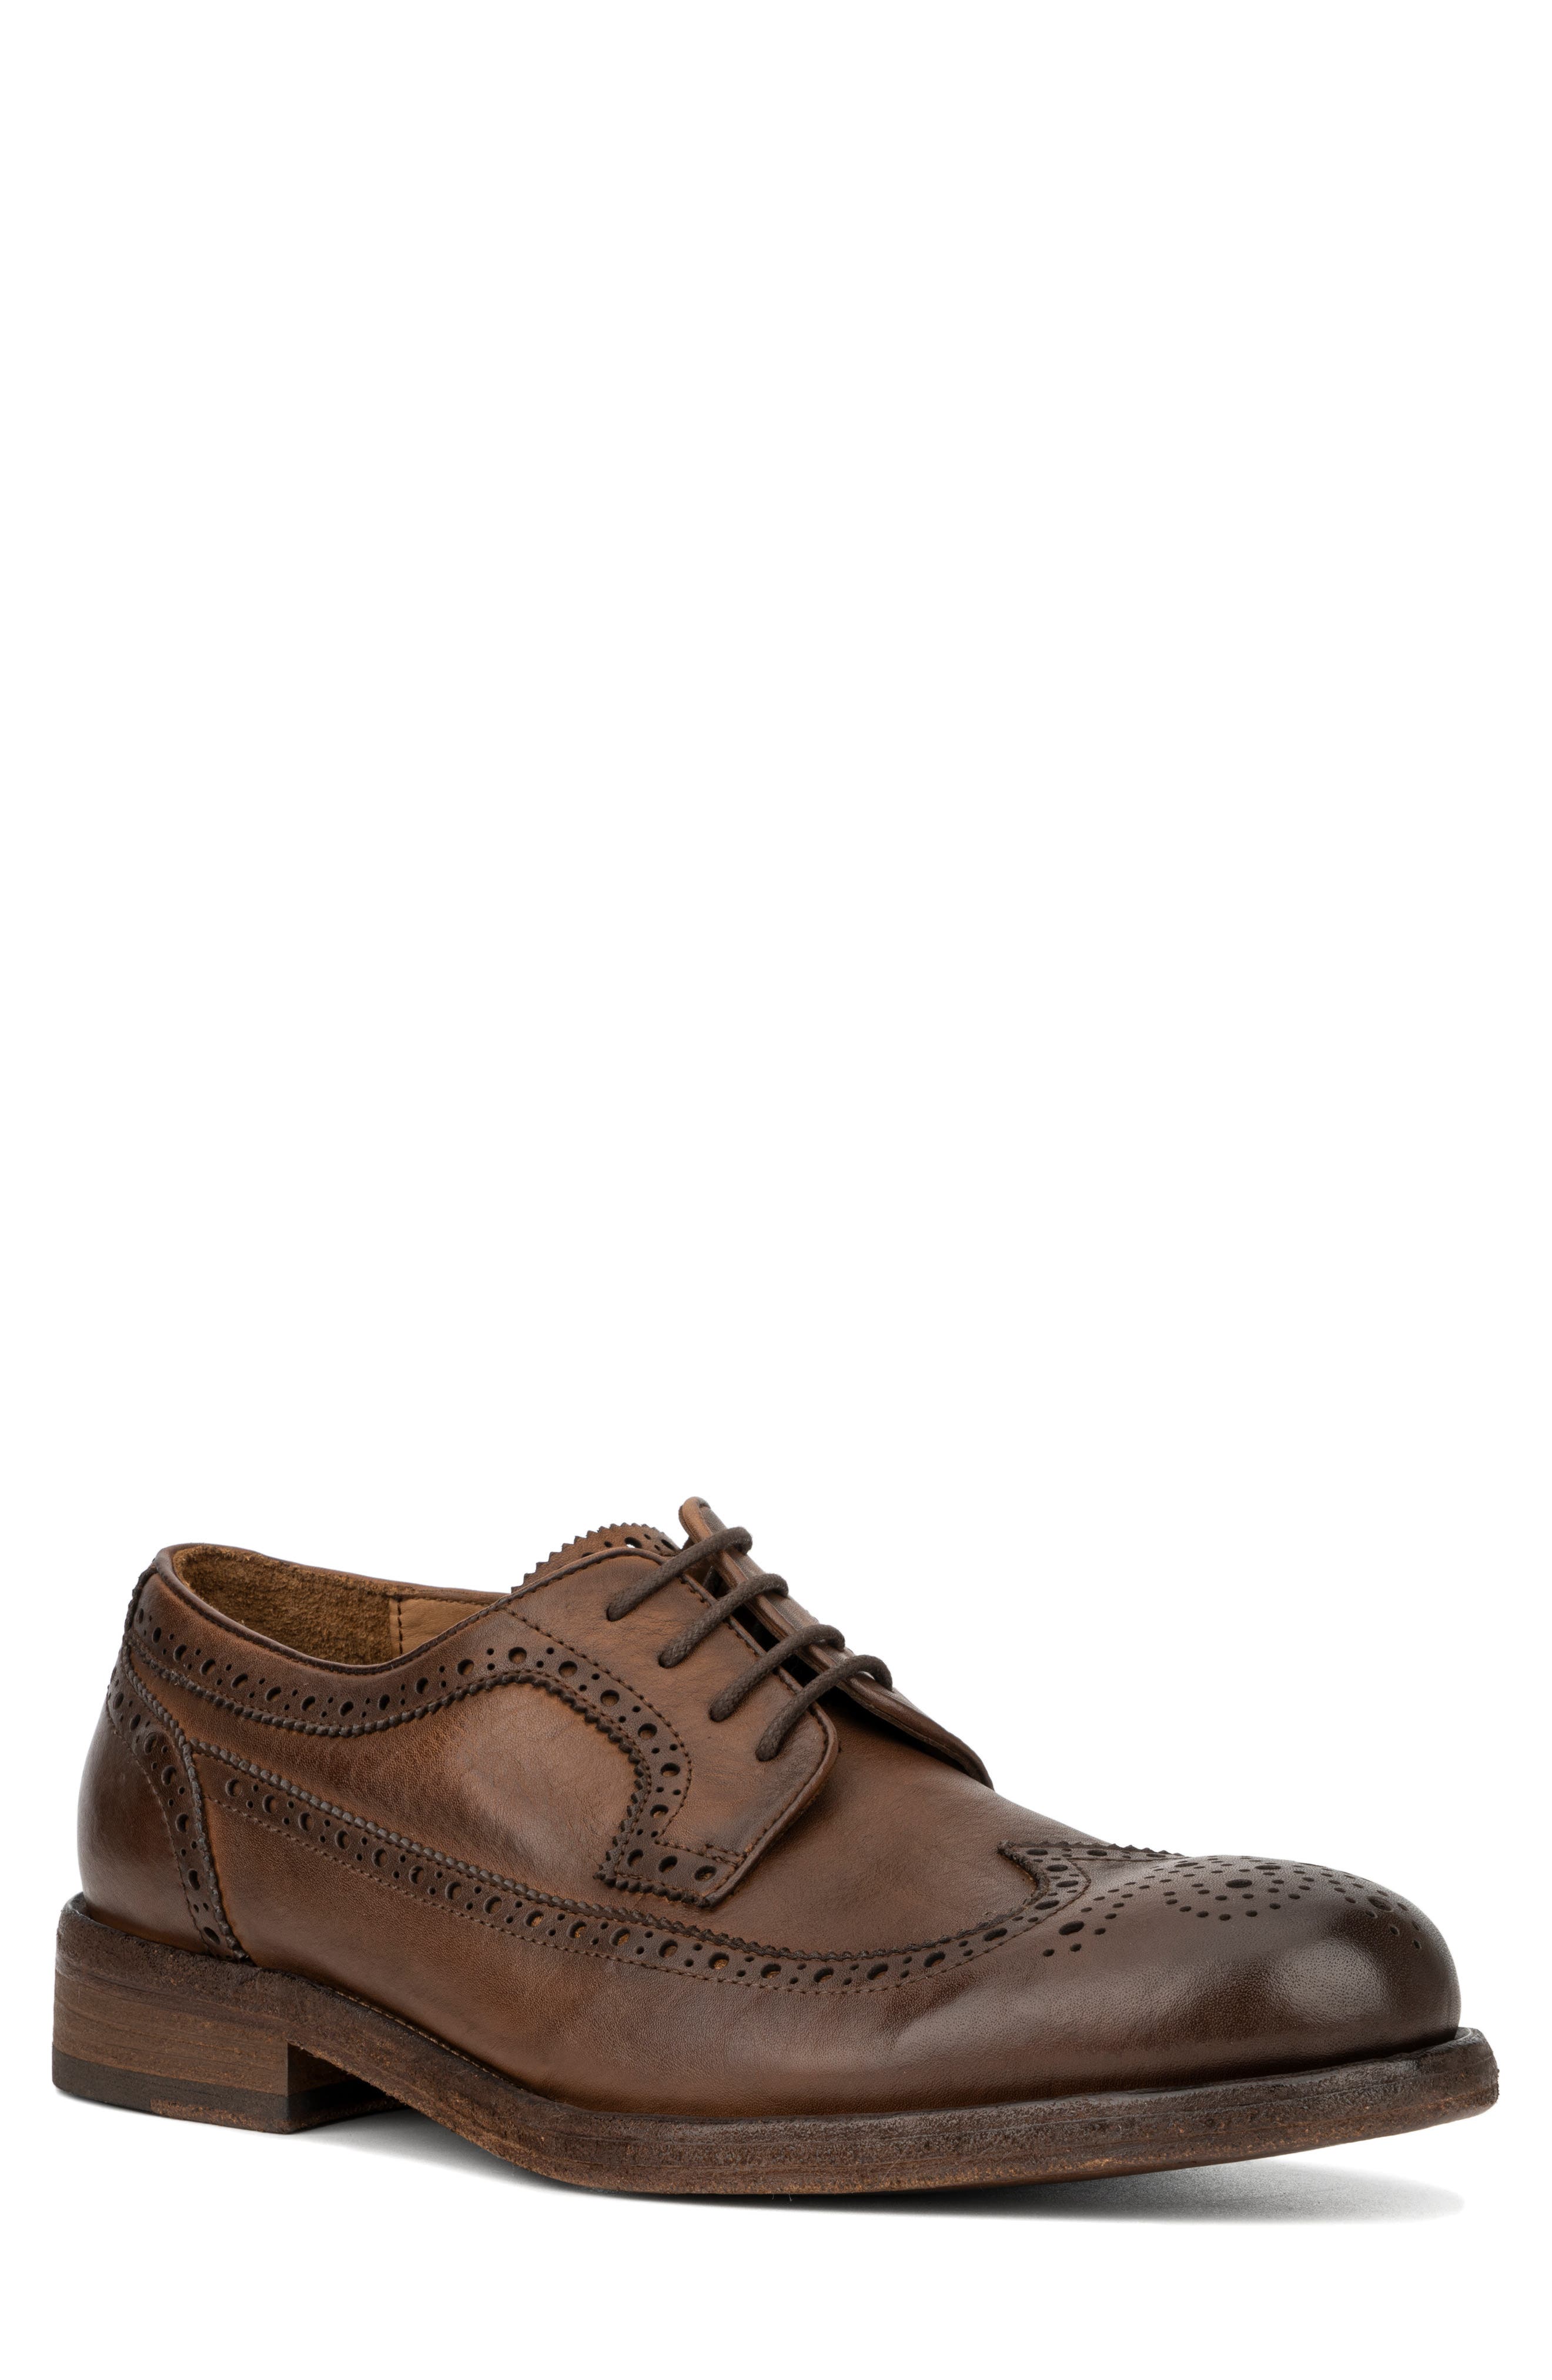 New Mens SOLE Brown Granby Leather Shoes Brogue Lace Up 